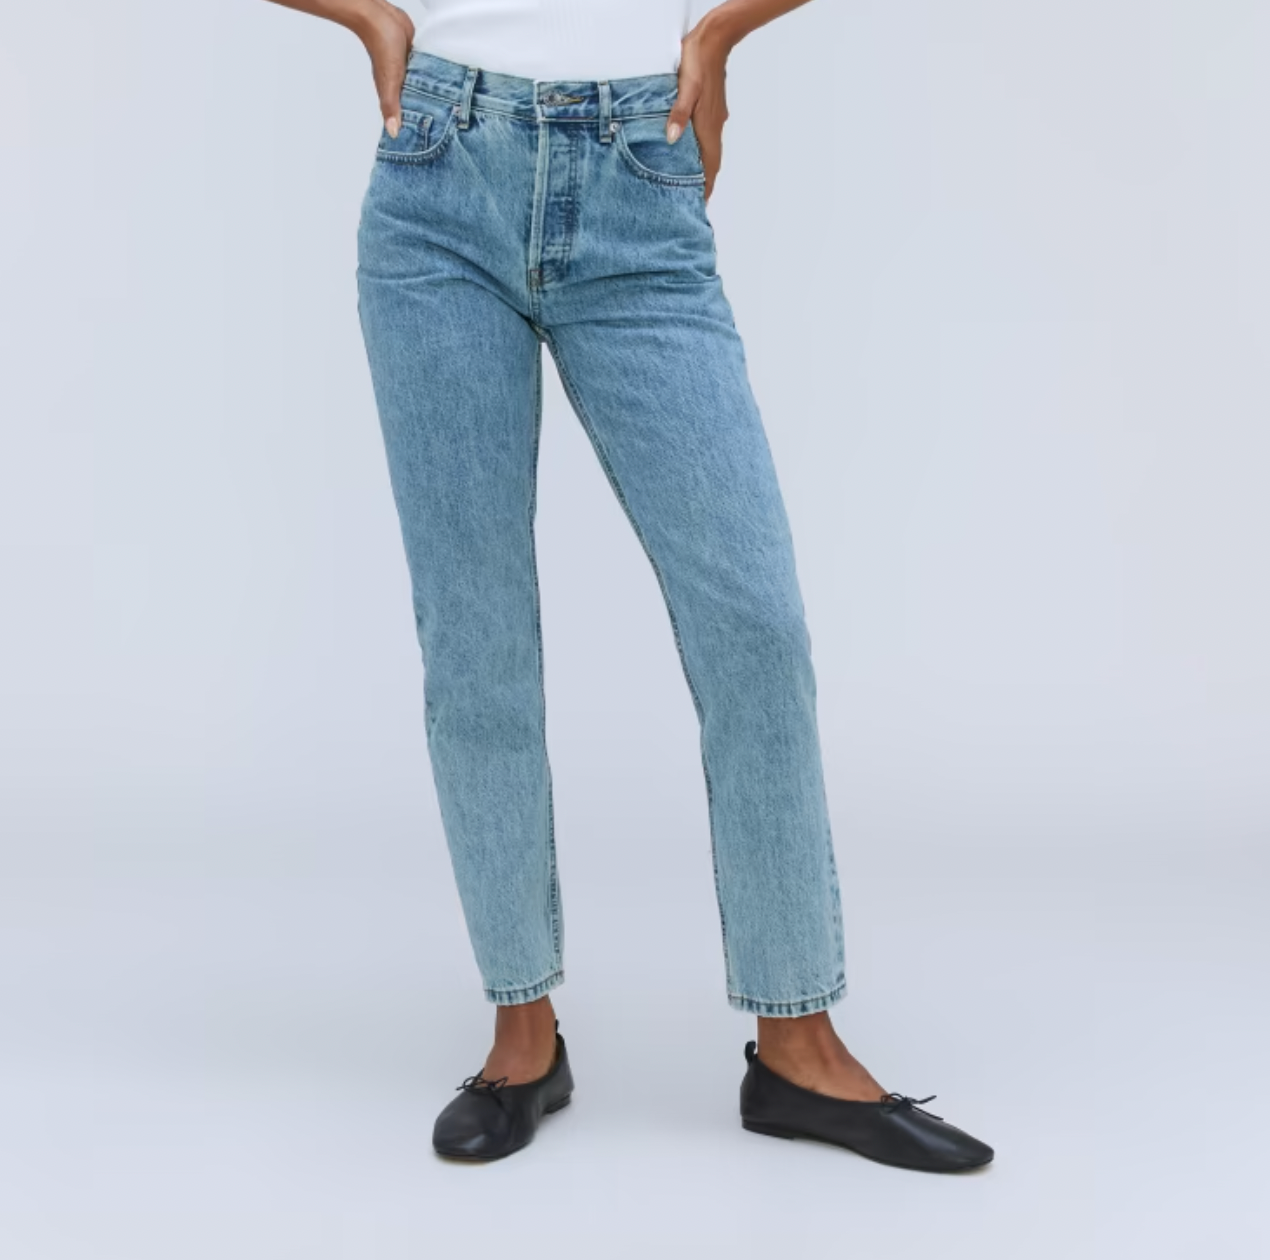 The Best Skinny Jeans For My Ample Booty + Thick Thighs - The Mom Edit